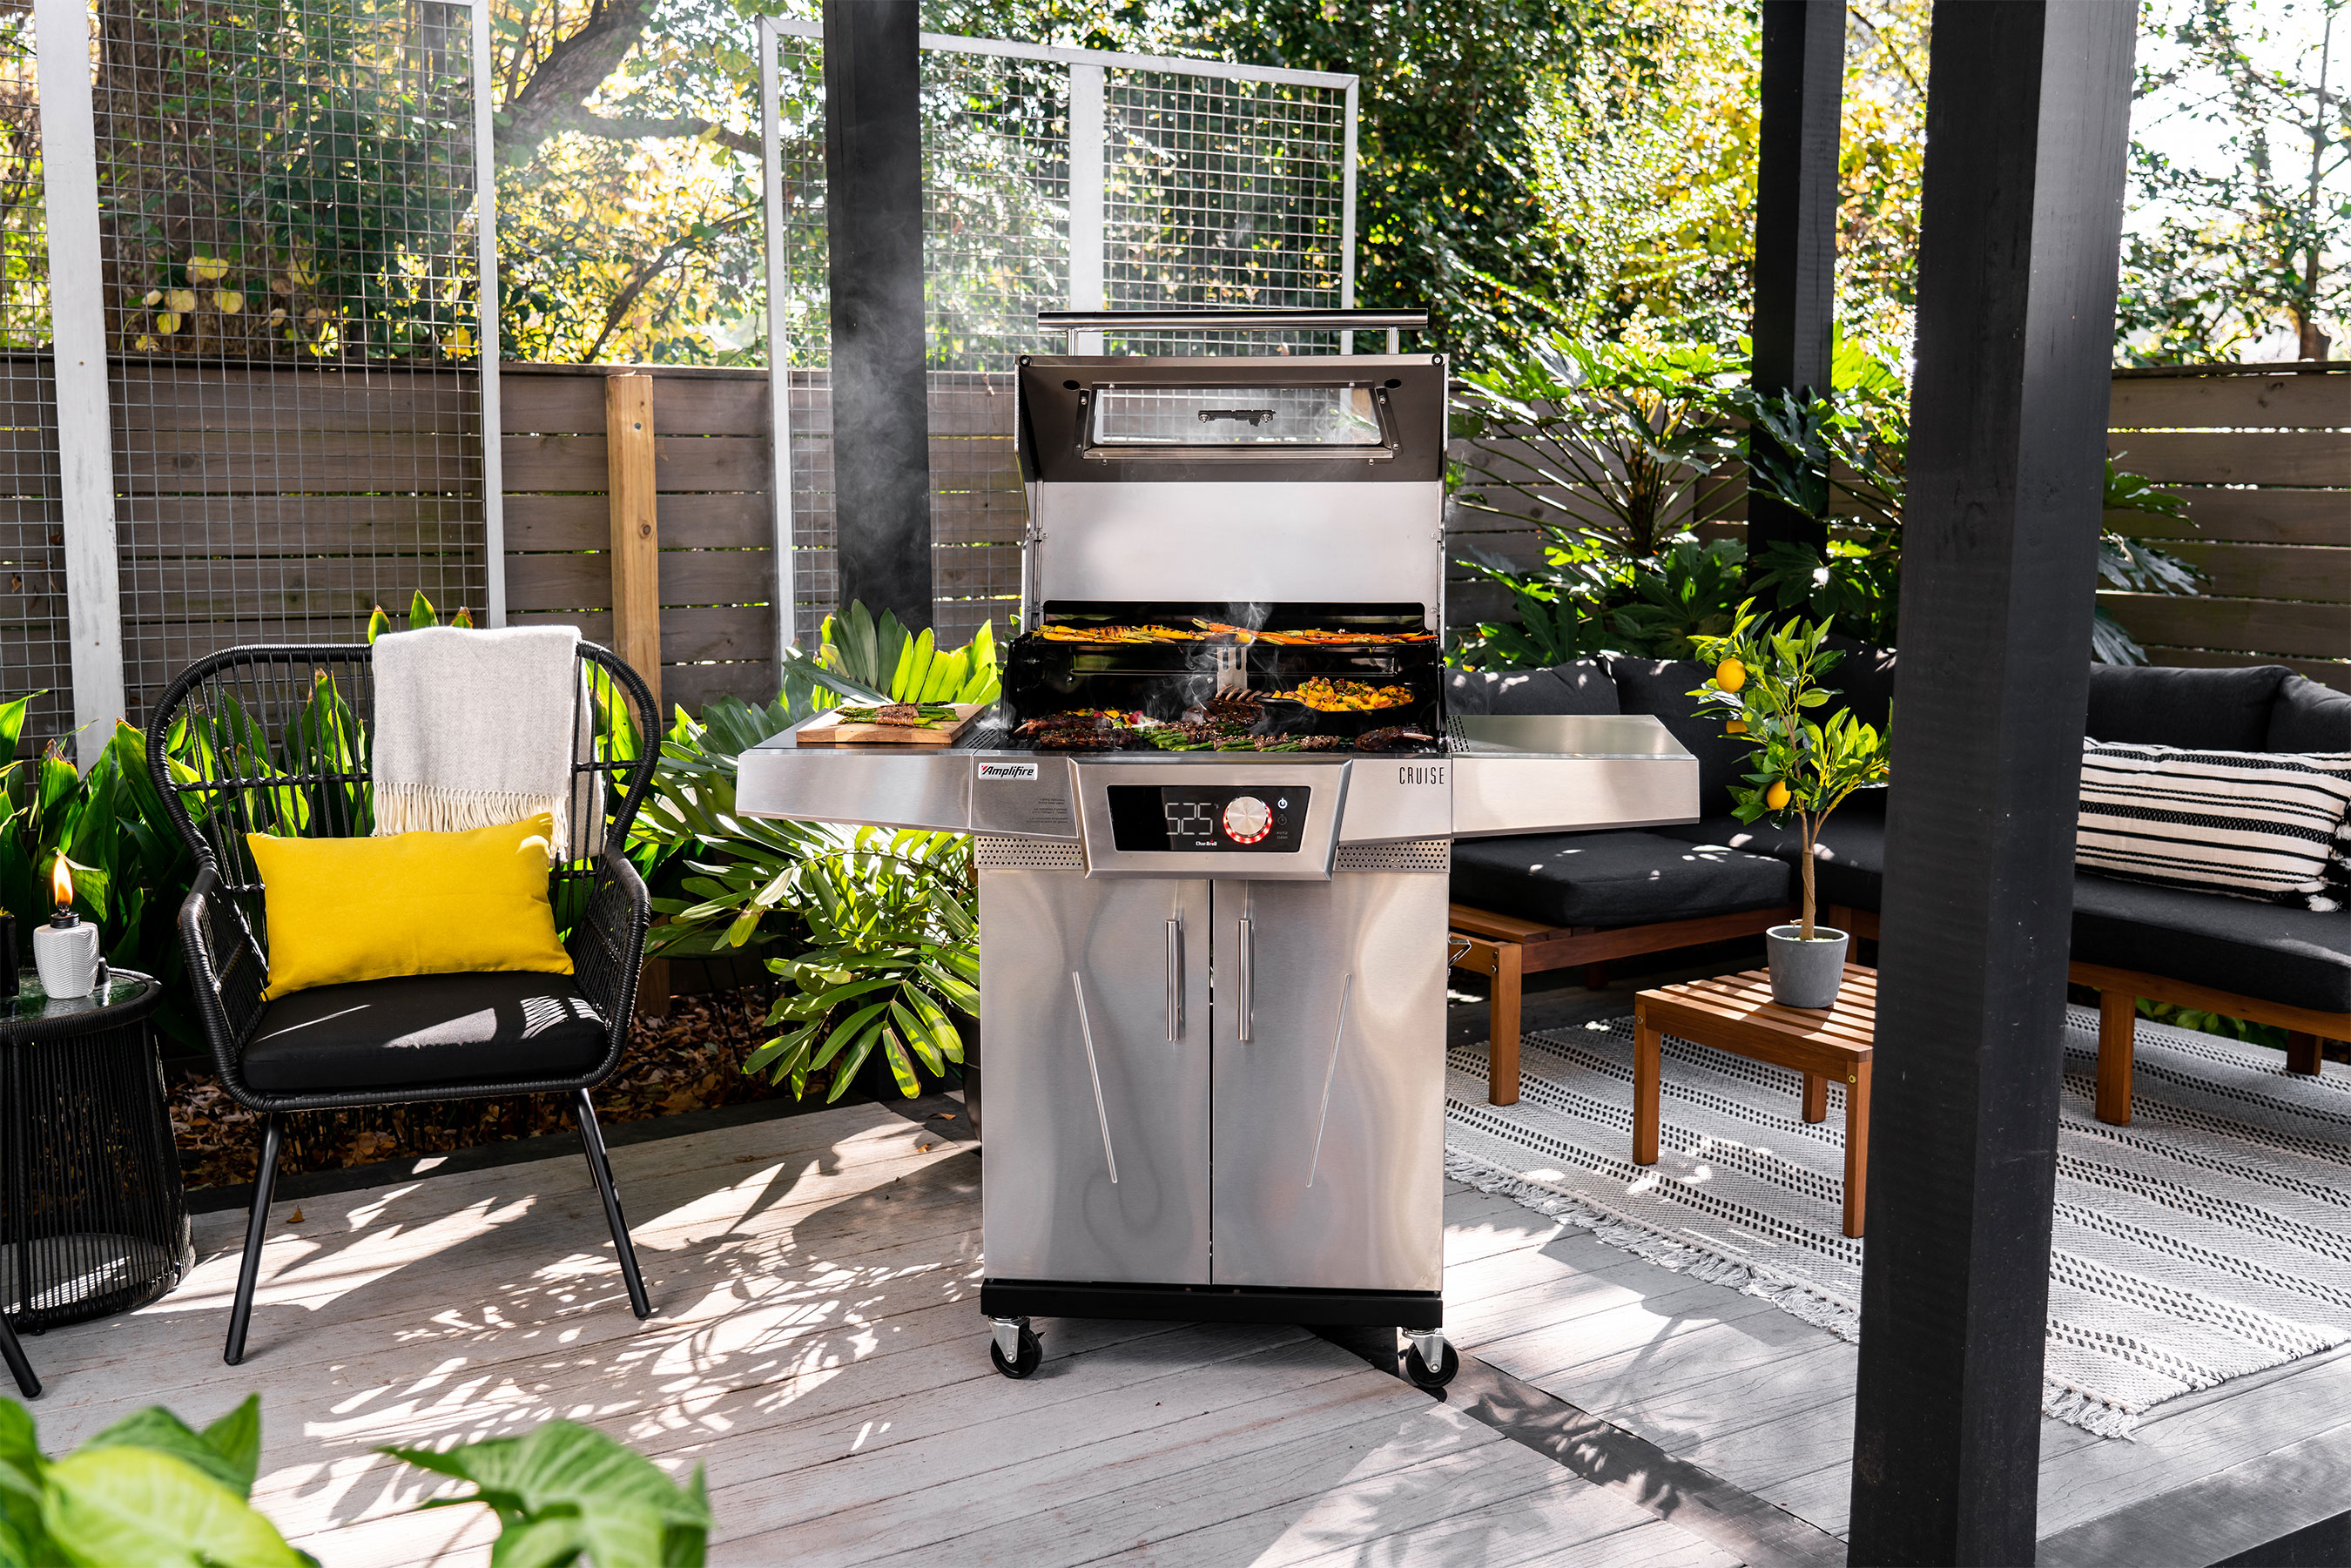 The grill’s built-in auto-calibration keeps the heat consistent as you cook, allowing you to grill things in a way you never thought possible.